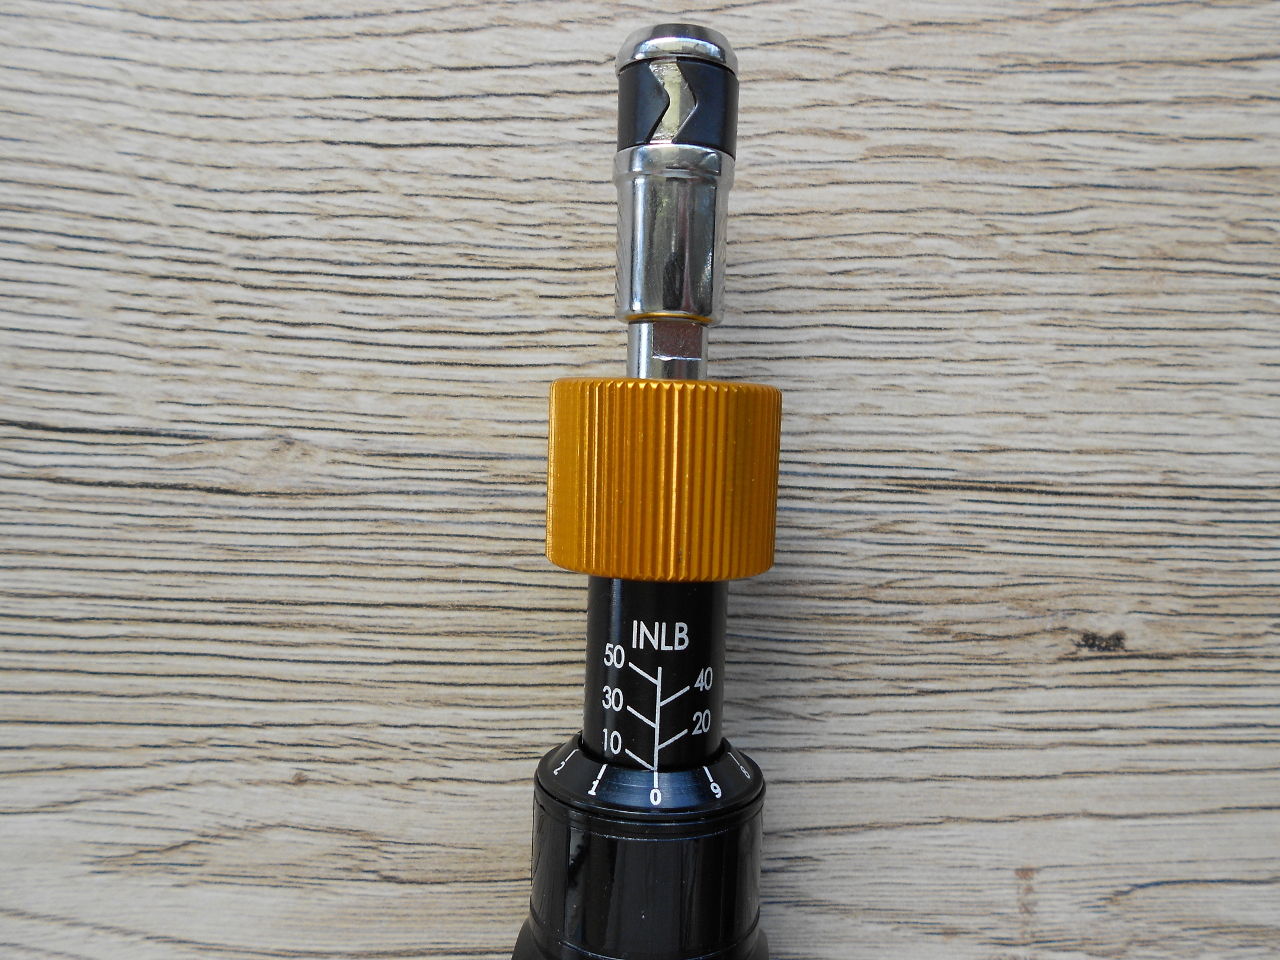 For getting correct torque settings on a rifle a decent and accurate torque screwdriver is needed. Some torque screwdrivers only measure accurately within 5 inch/pound increments. The Capri torque screwdriver measures in 1 inch/pound increments.